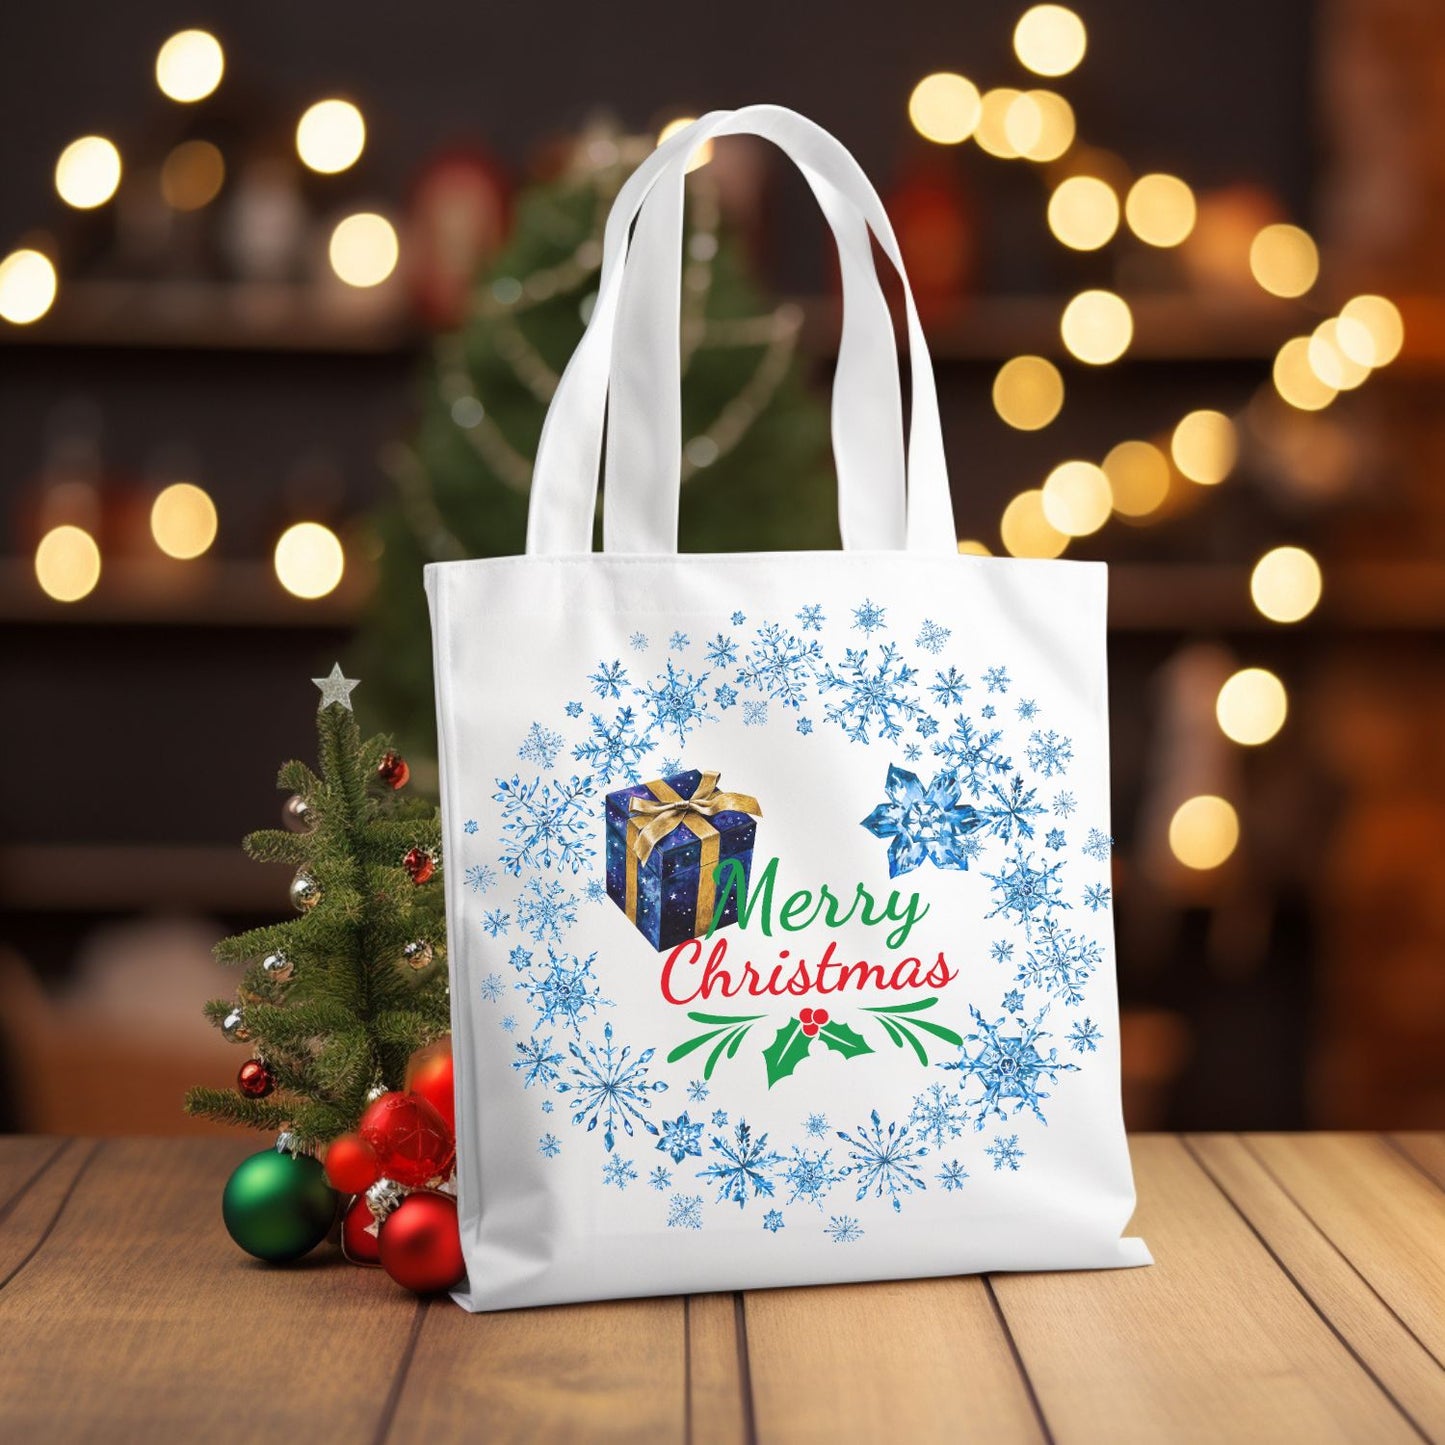 Christmas Tote Bag | Family Gift | Stylish Holiday Carryall for Festive Fashion Accessories   